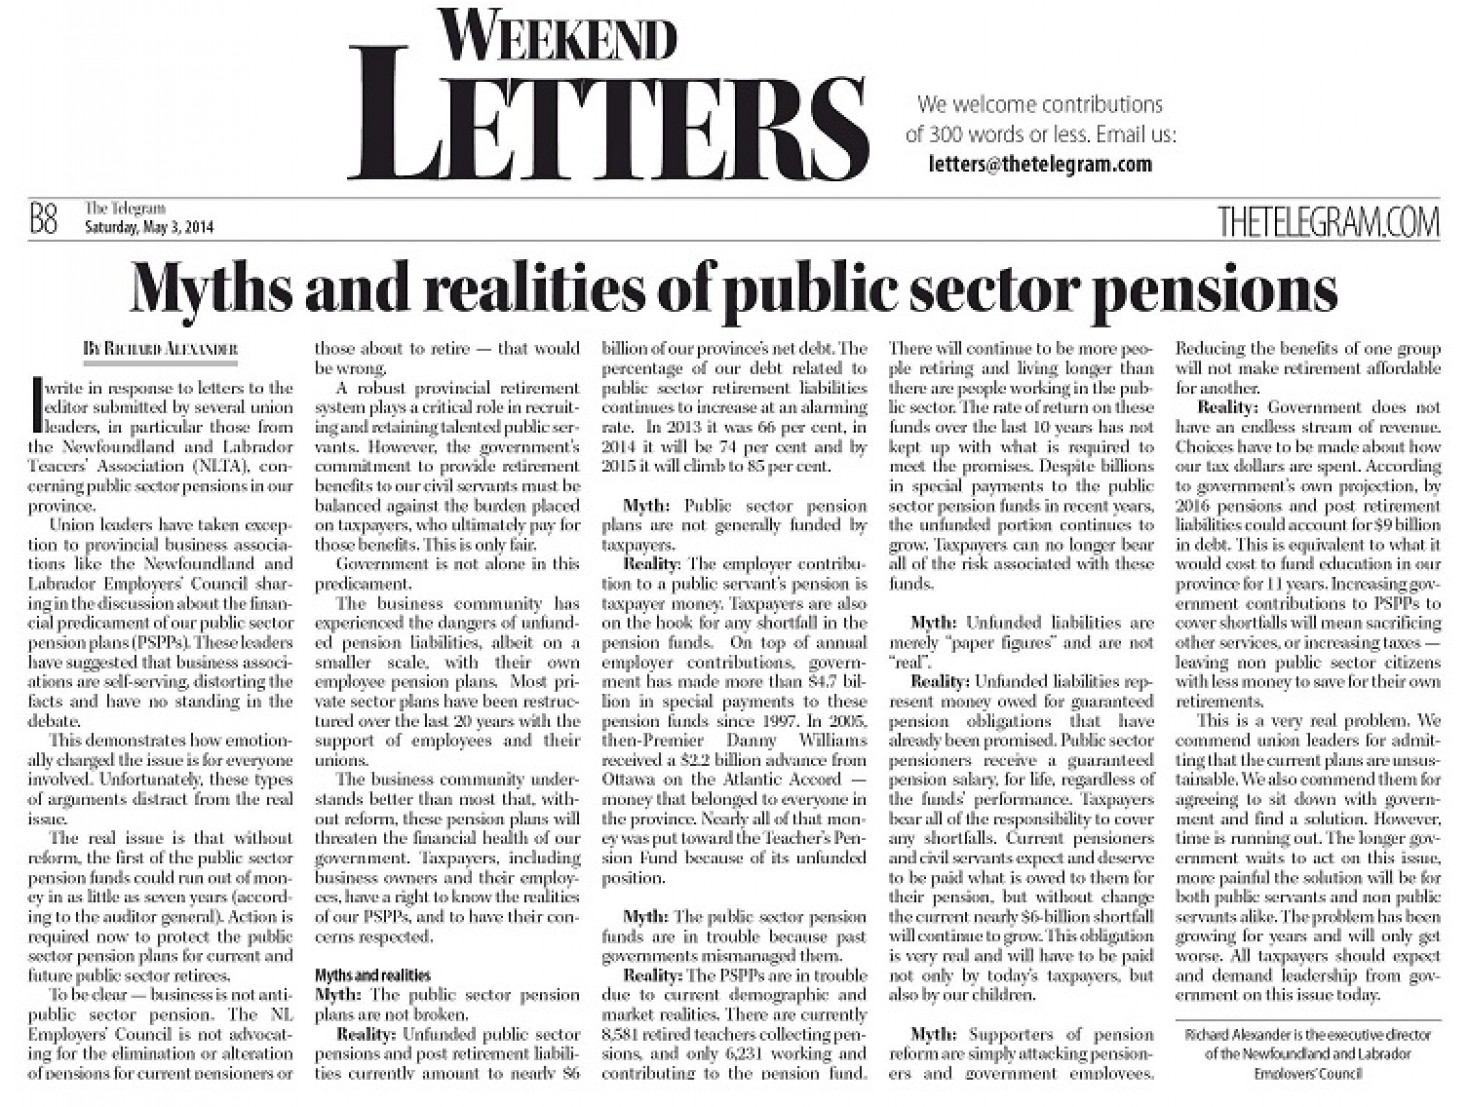 Myths and realities of public sector pensions